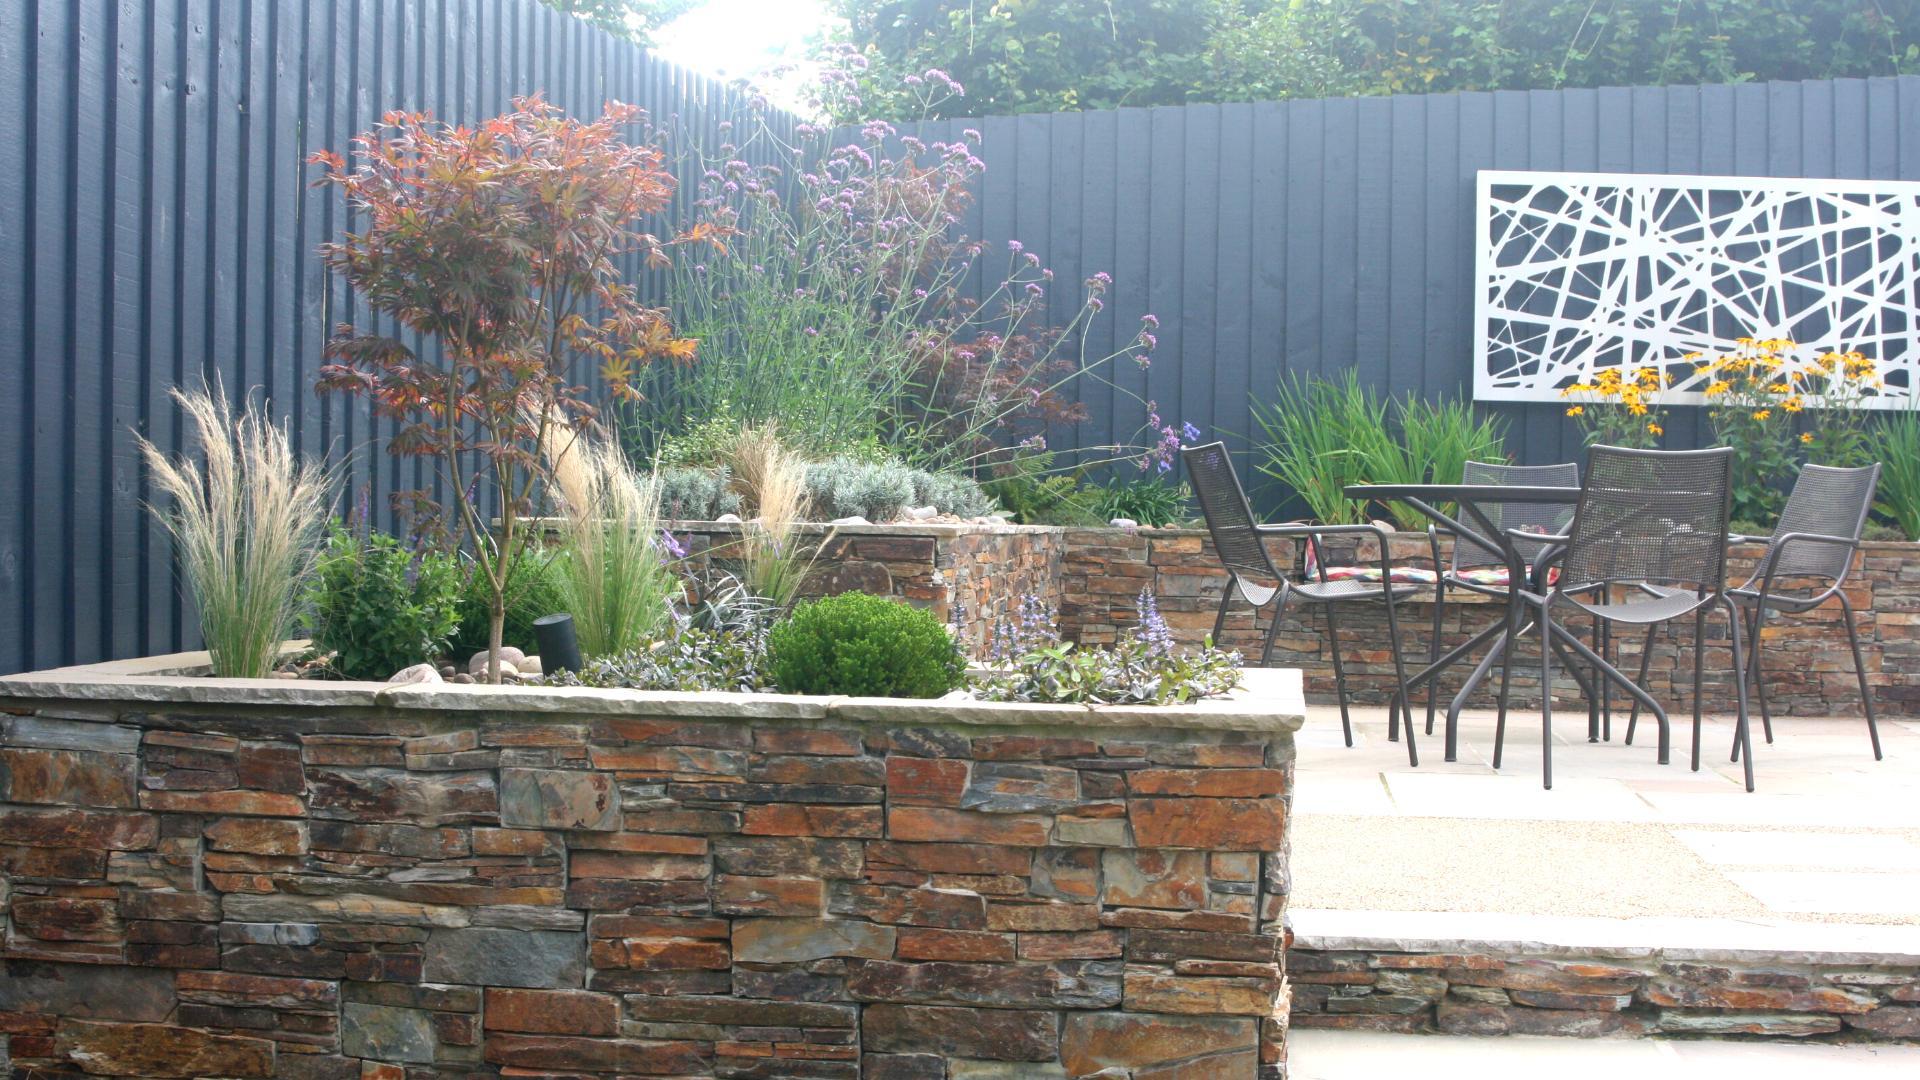 Alison Bockh Garden Design - Reused stone and painted fencing